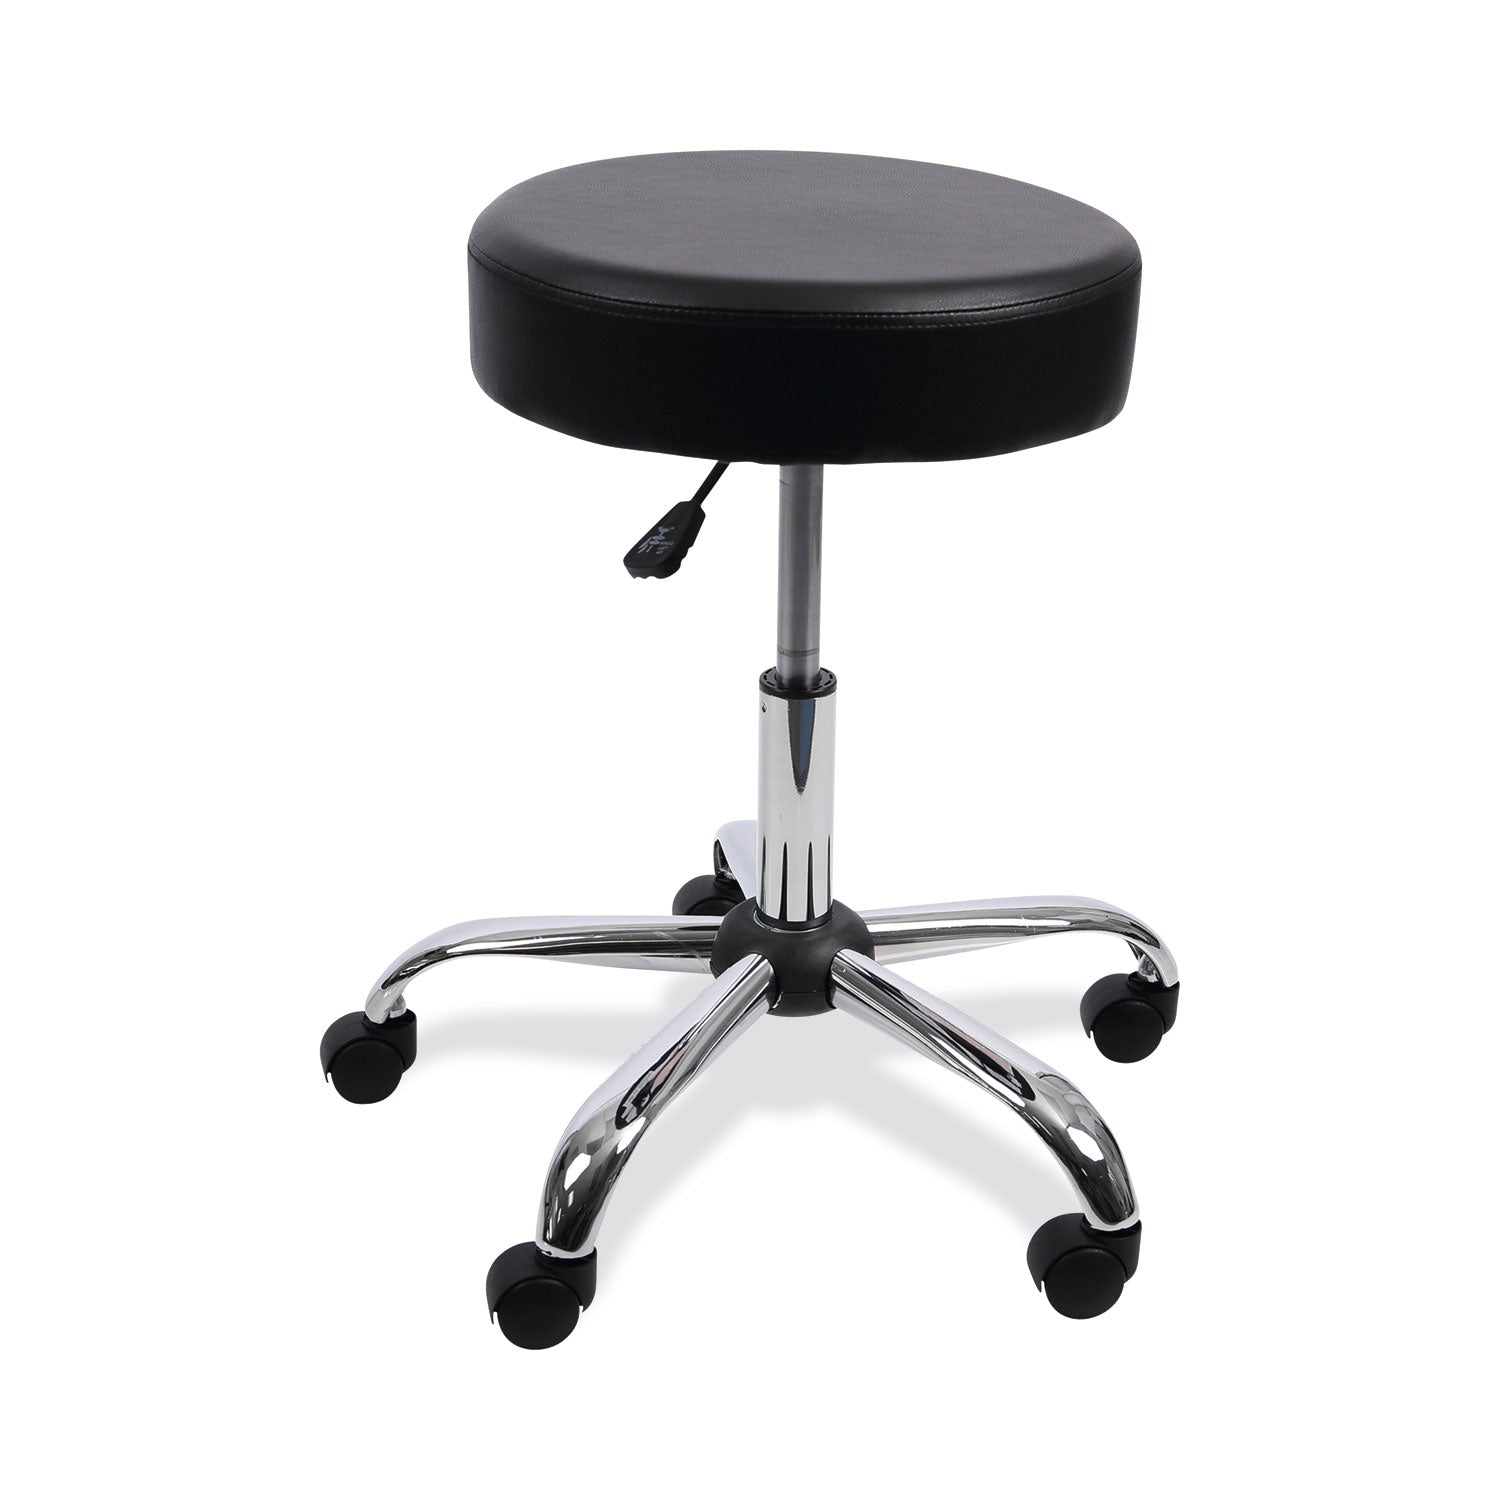 height-adjustable-lab-stool-backless-supports-up-to-275-lb-1969-to-2480-seat-height-black-seat-chrome-base_aleus4716 - 1